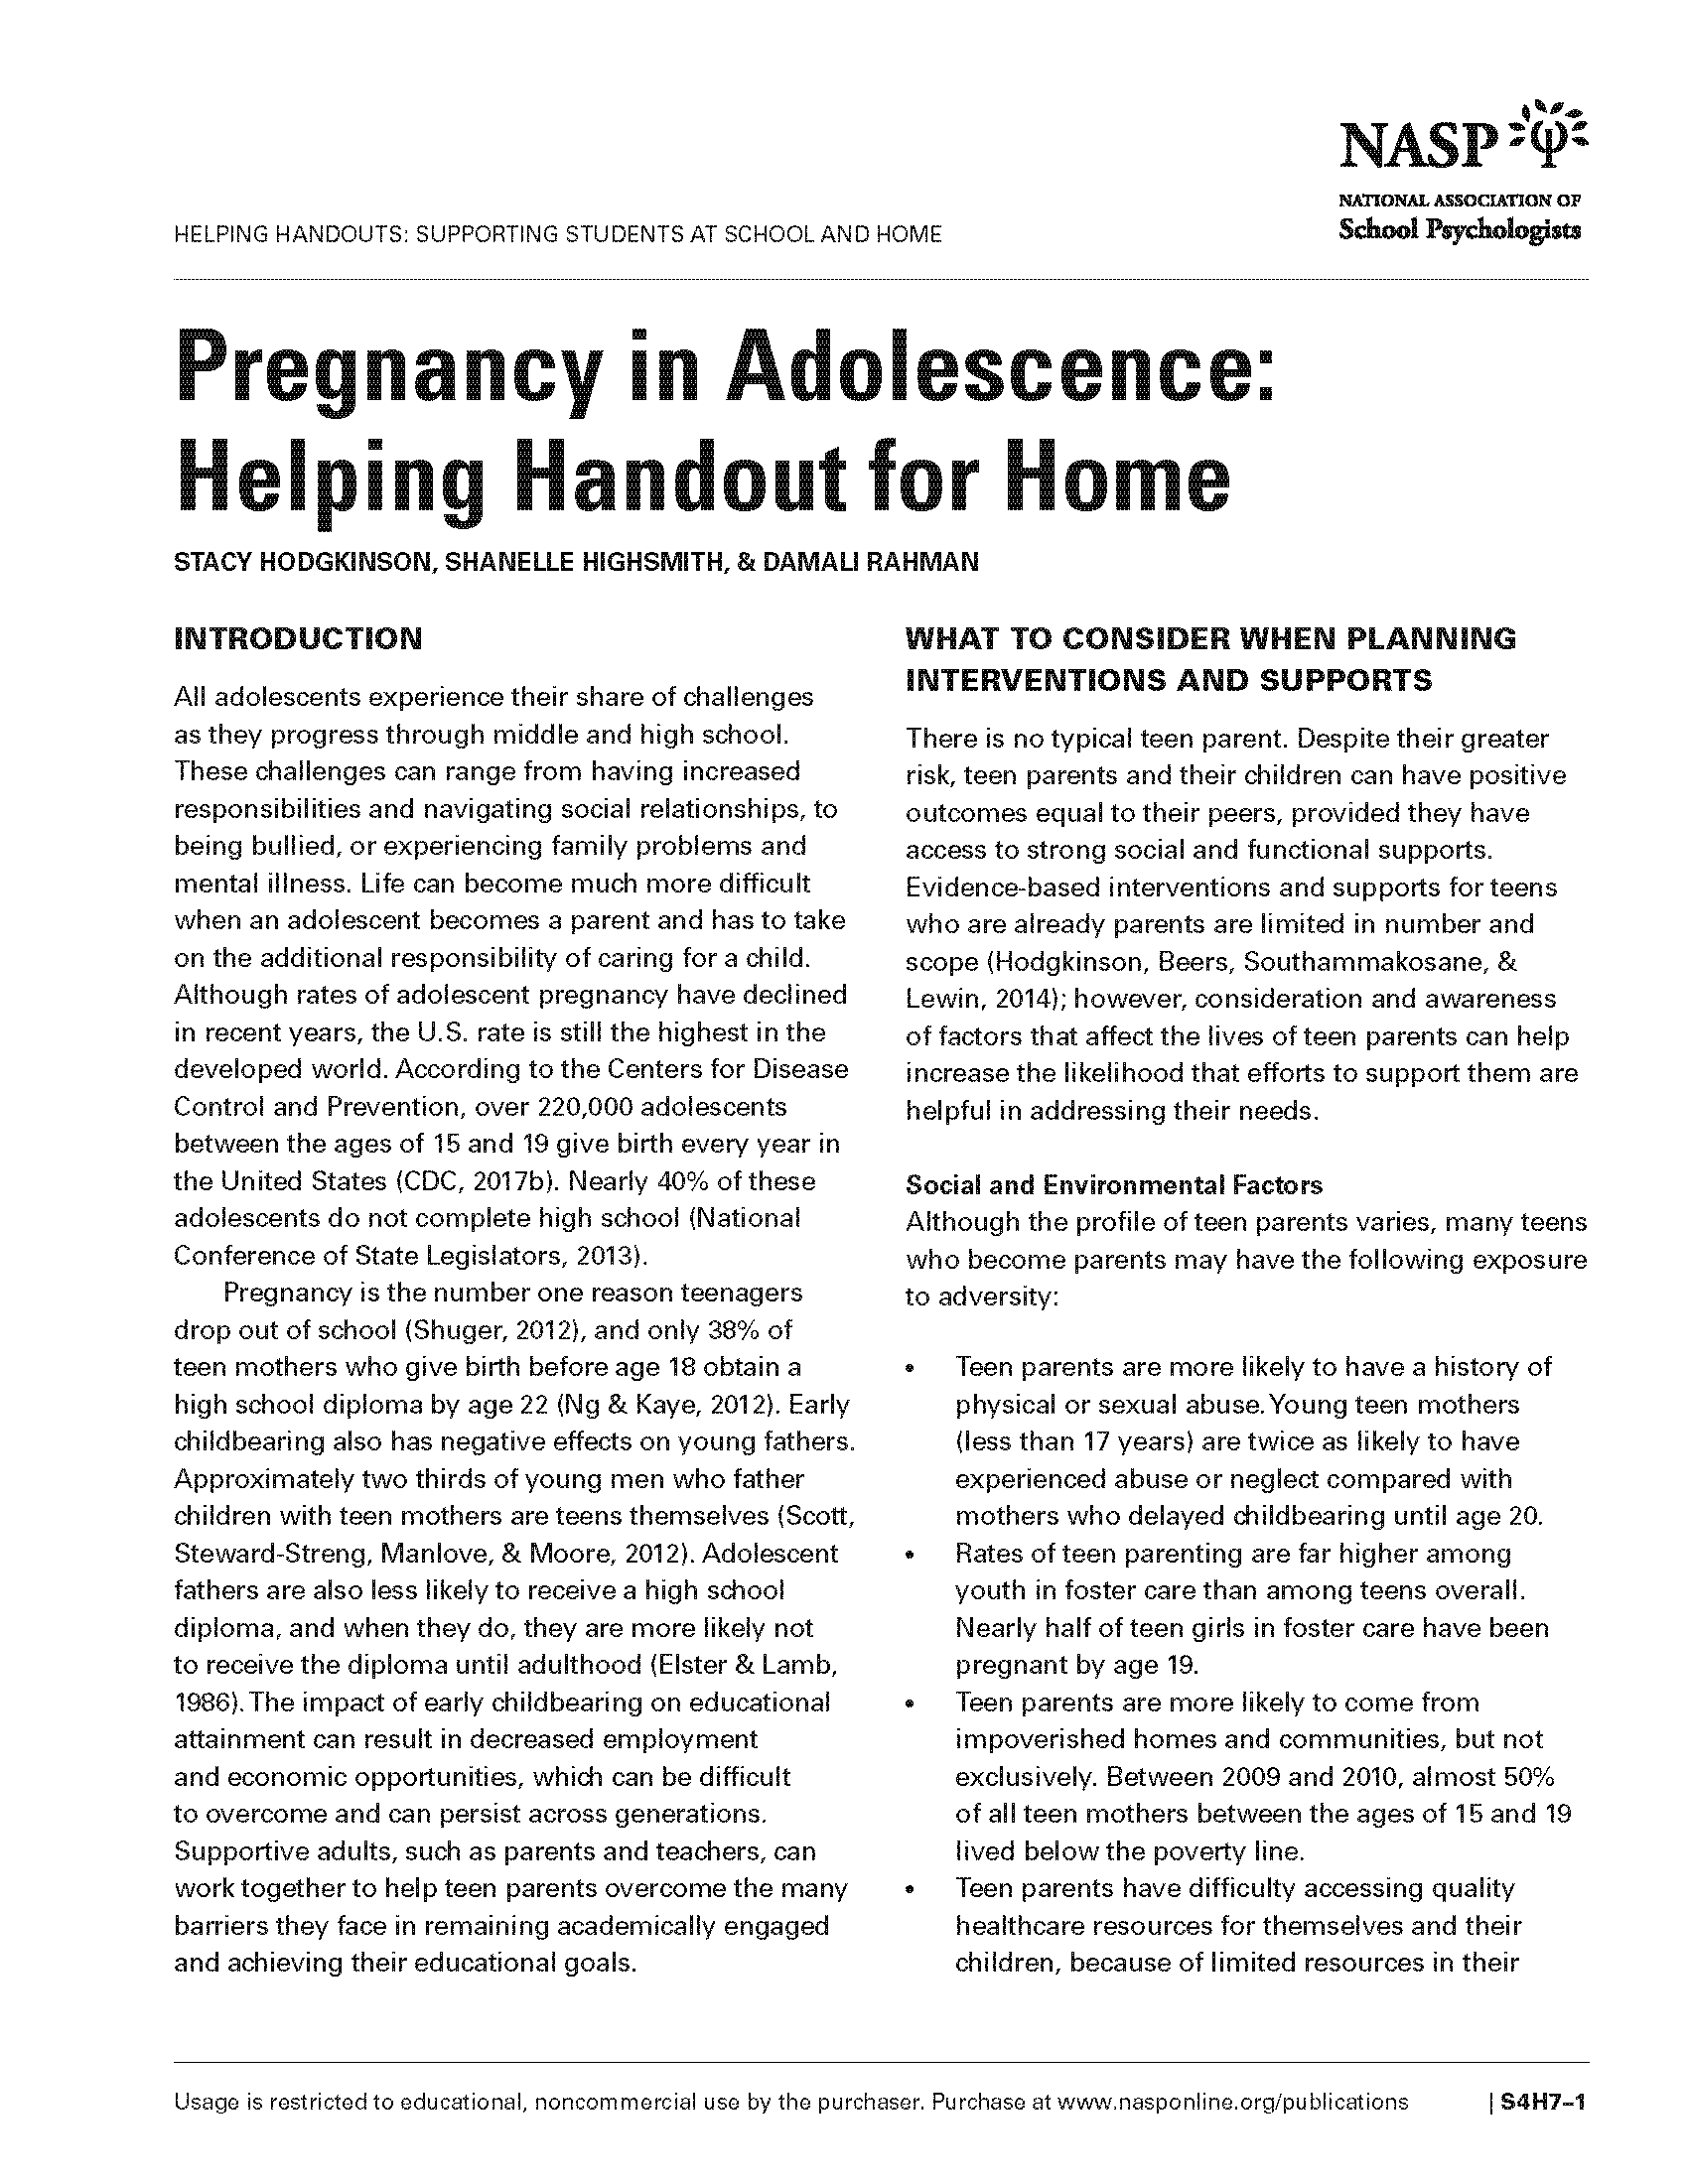 Pregnancy in Adolescence: Helping Handout for Home 